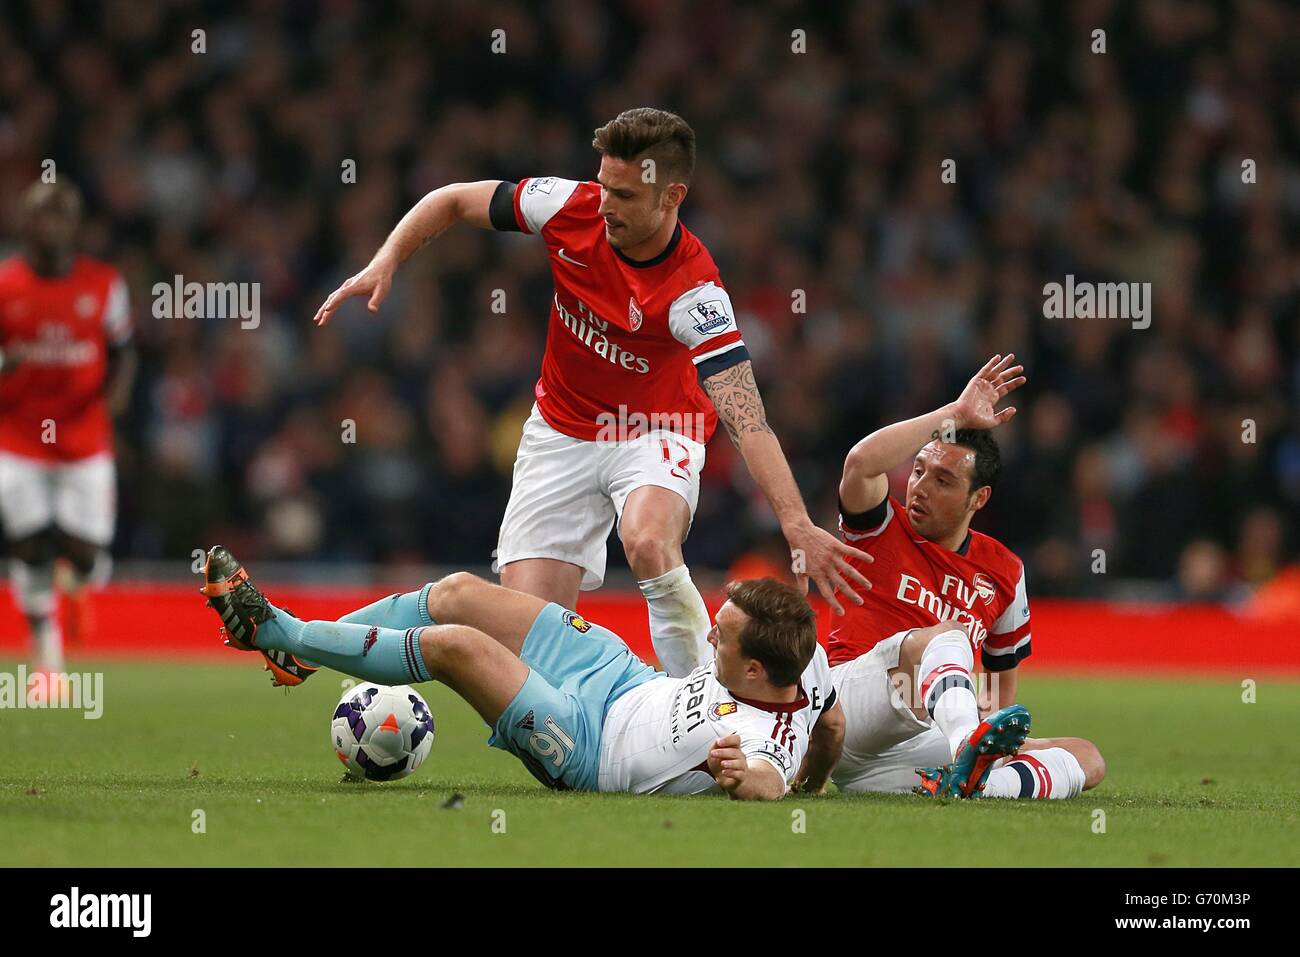 West Ham United's Mark Noble (centre) slides in to challenge Arsenal's Santi Cazorla (right) and Olivier Giroud Stock Photo